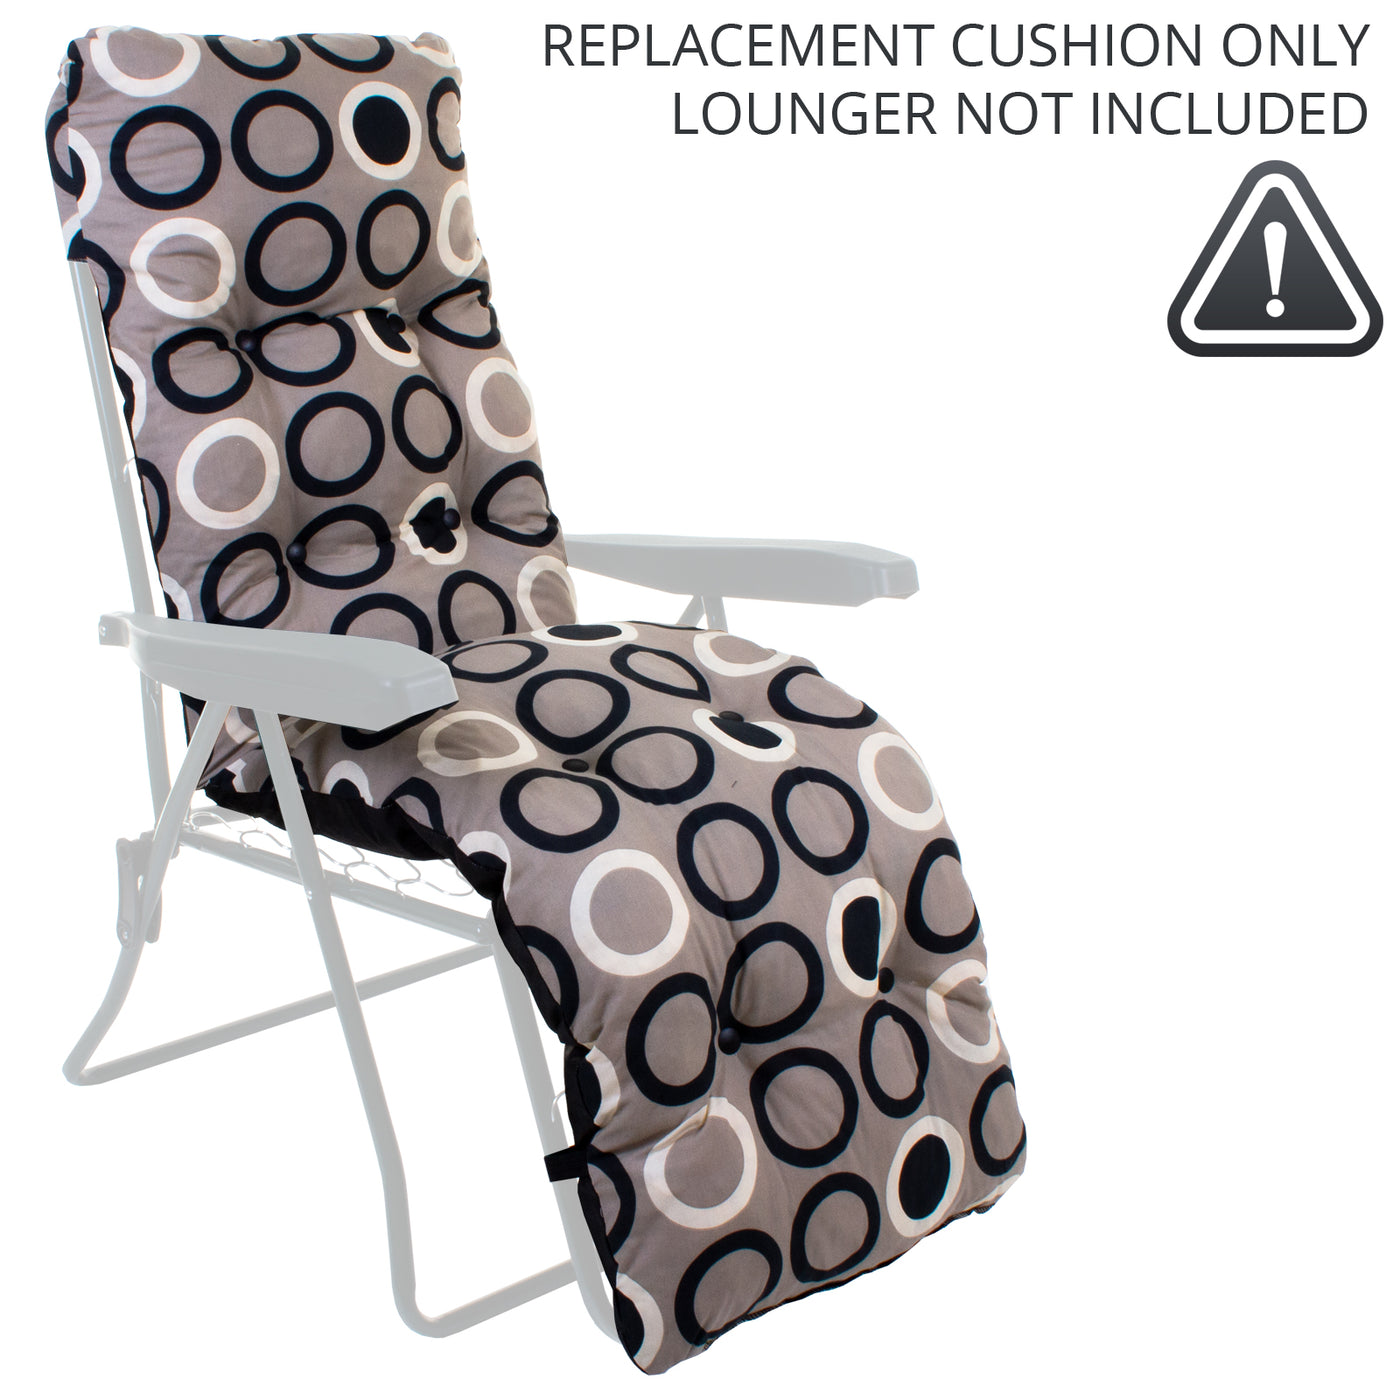 sun lounger cushions only